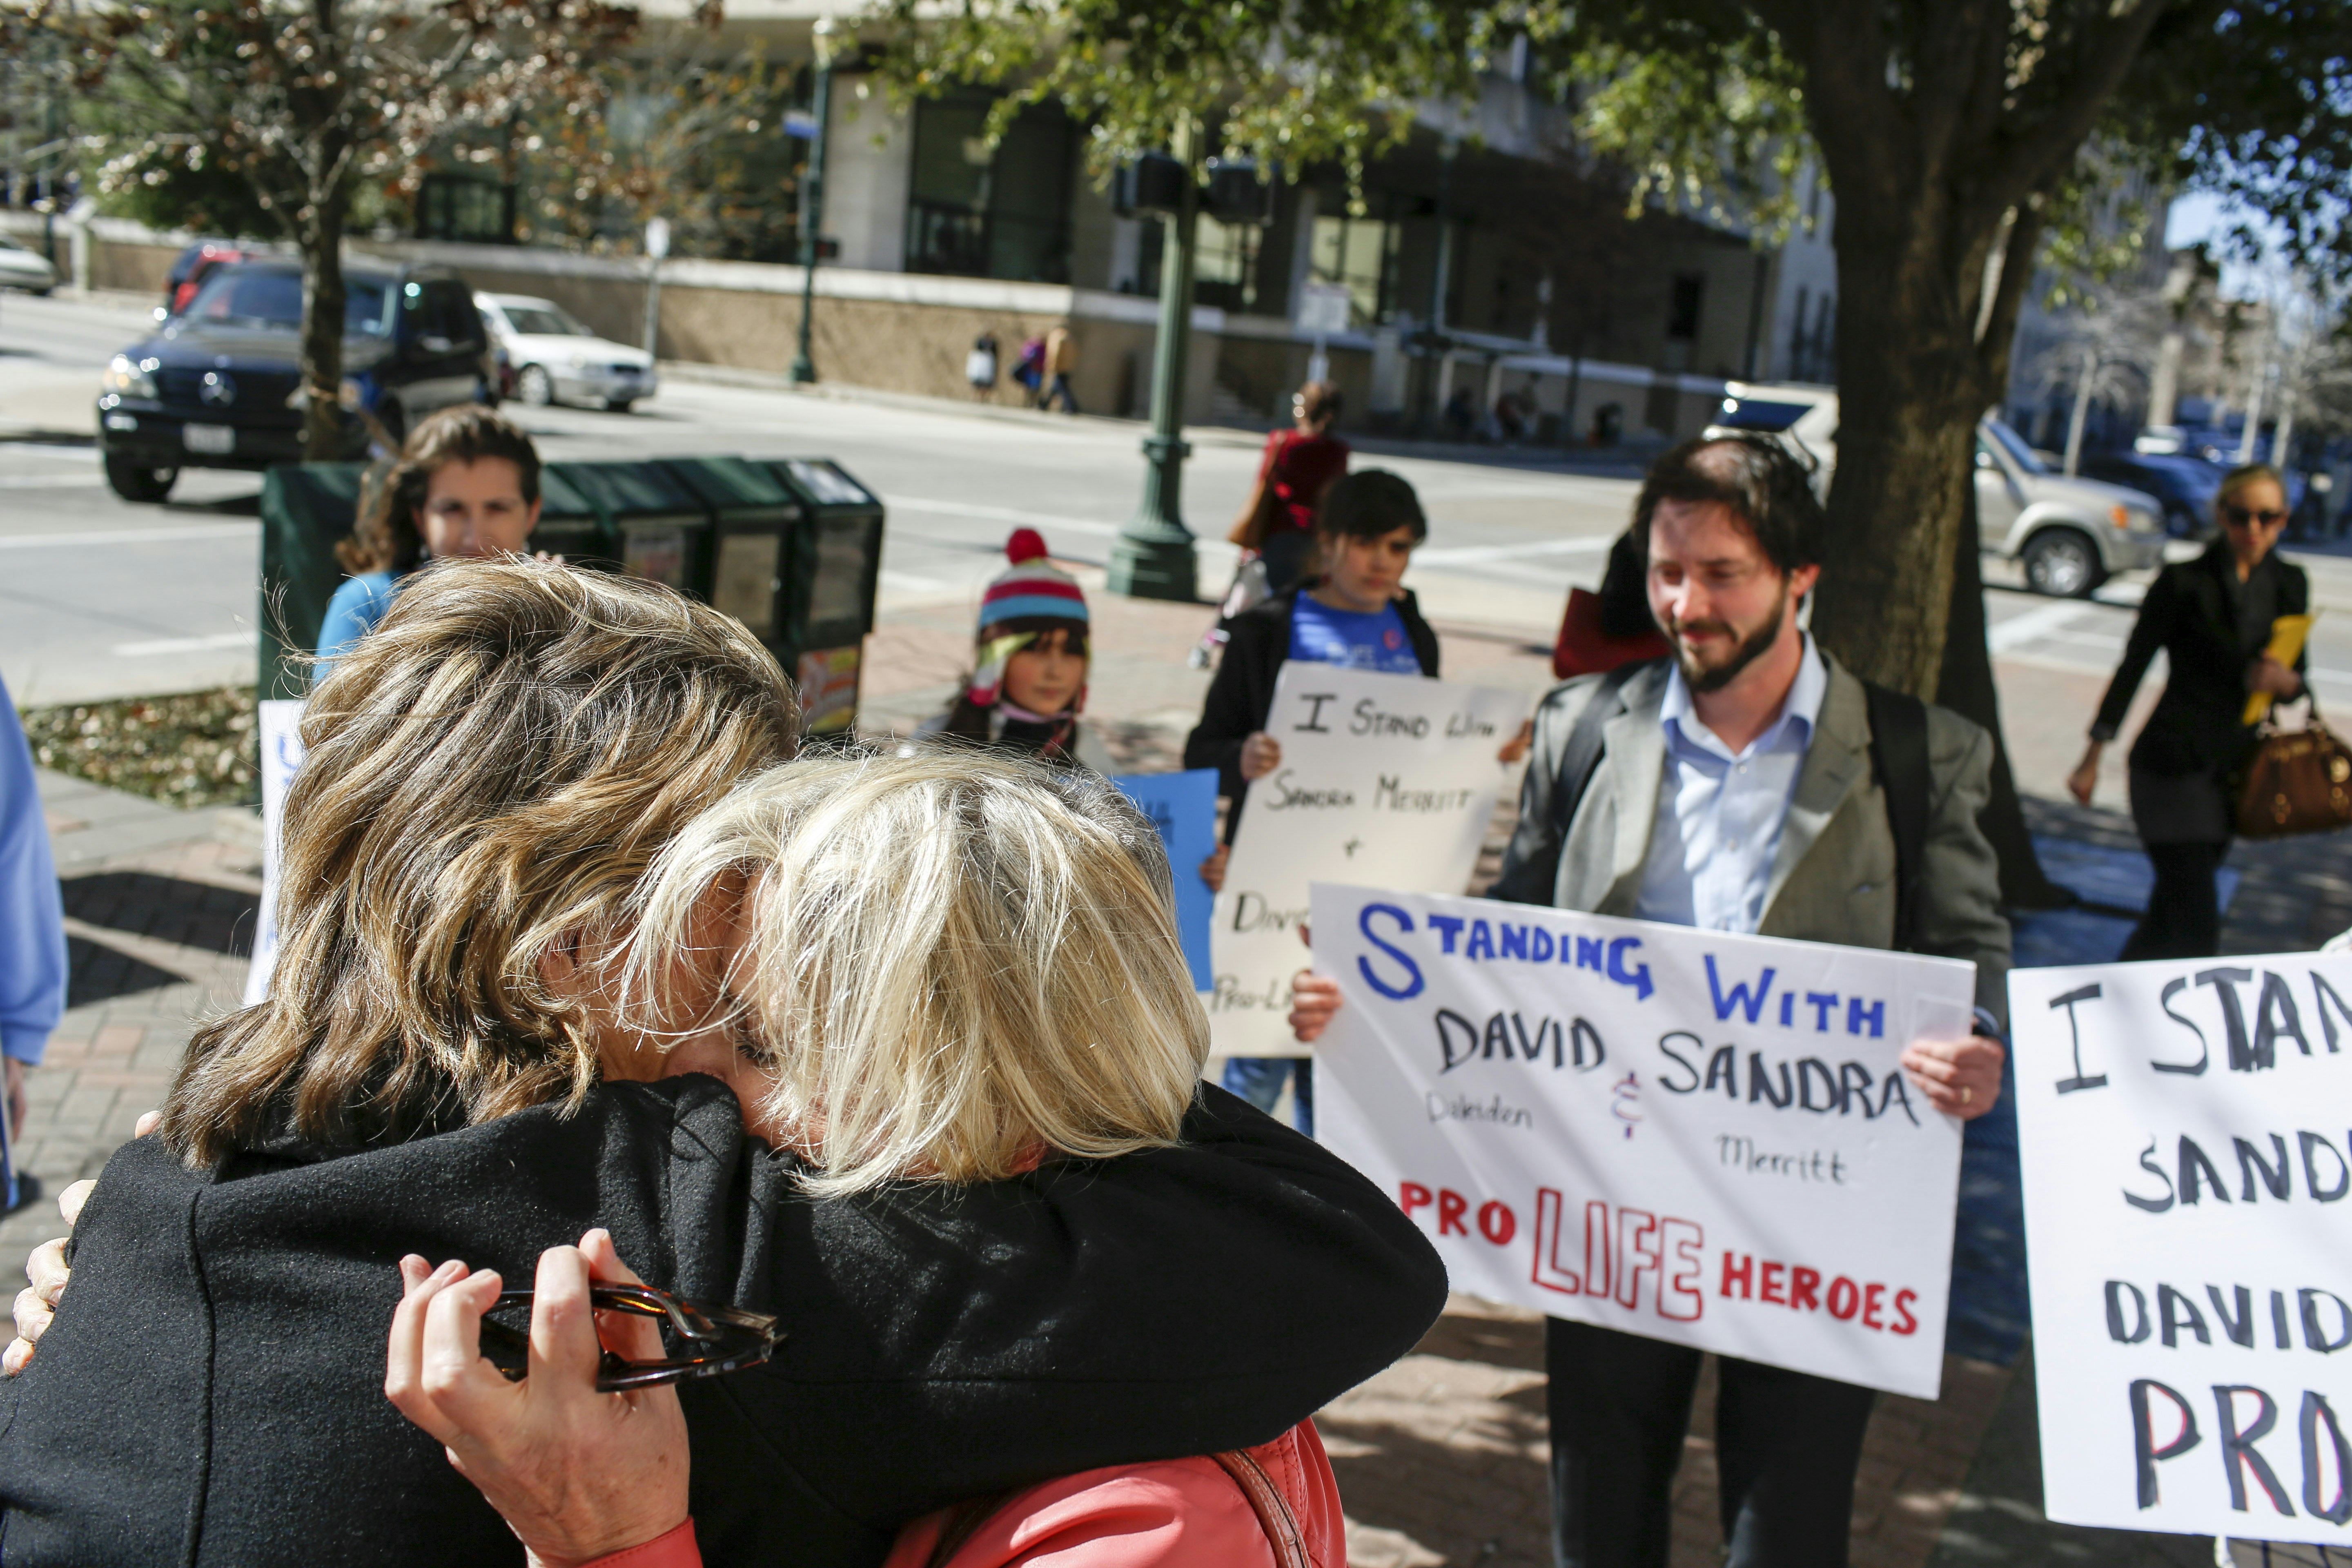 HOUSTON, TX - FEBRUARY 3:   Sandra Merritt, (R) a defendant in a recent indictment reversal stemming from a Planned Parenthood surreptitious video she helped produce, hugs a supporter after she appeared in court at the Harris County Criminal Courthouse February 3, 2016 in Houston, Texas. Merritt posted bond, which was reduced from $10,000 to $2,000. The other indicted activist, David Daleiden, was scheduled to turn himself in Thursday.  (Photo by Eric Kayne/Getty Images)